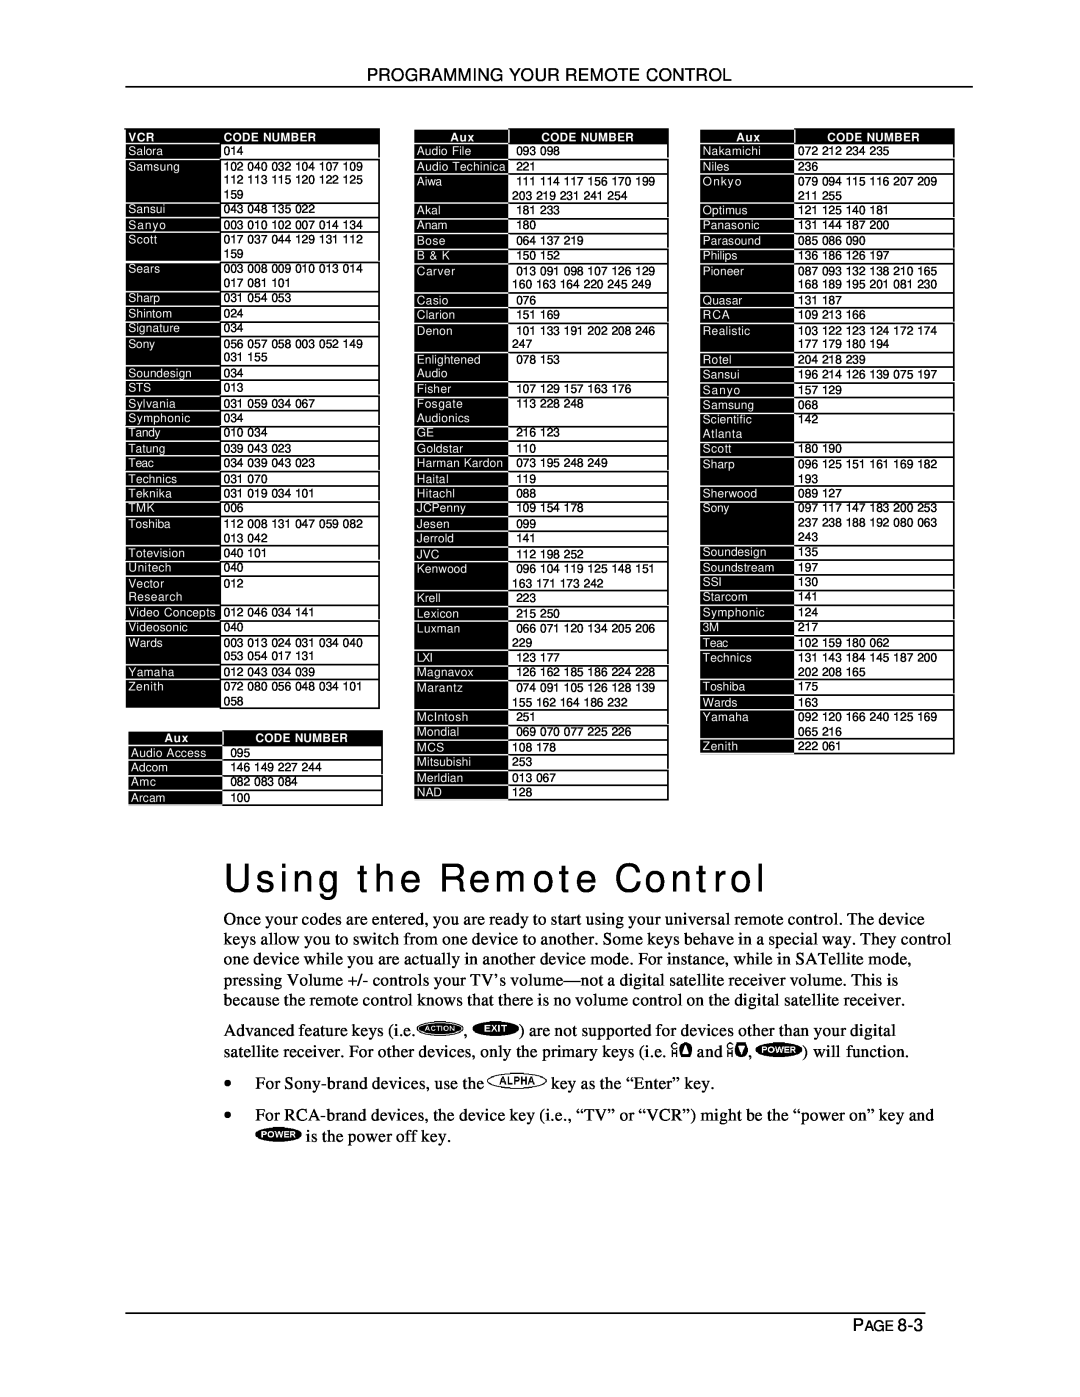 DirecTV HIRD-E11, HIRD-E25 owner manual Using the Remote Control, Programming Your Remote Control, Page 